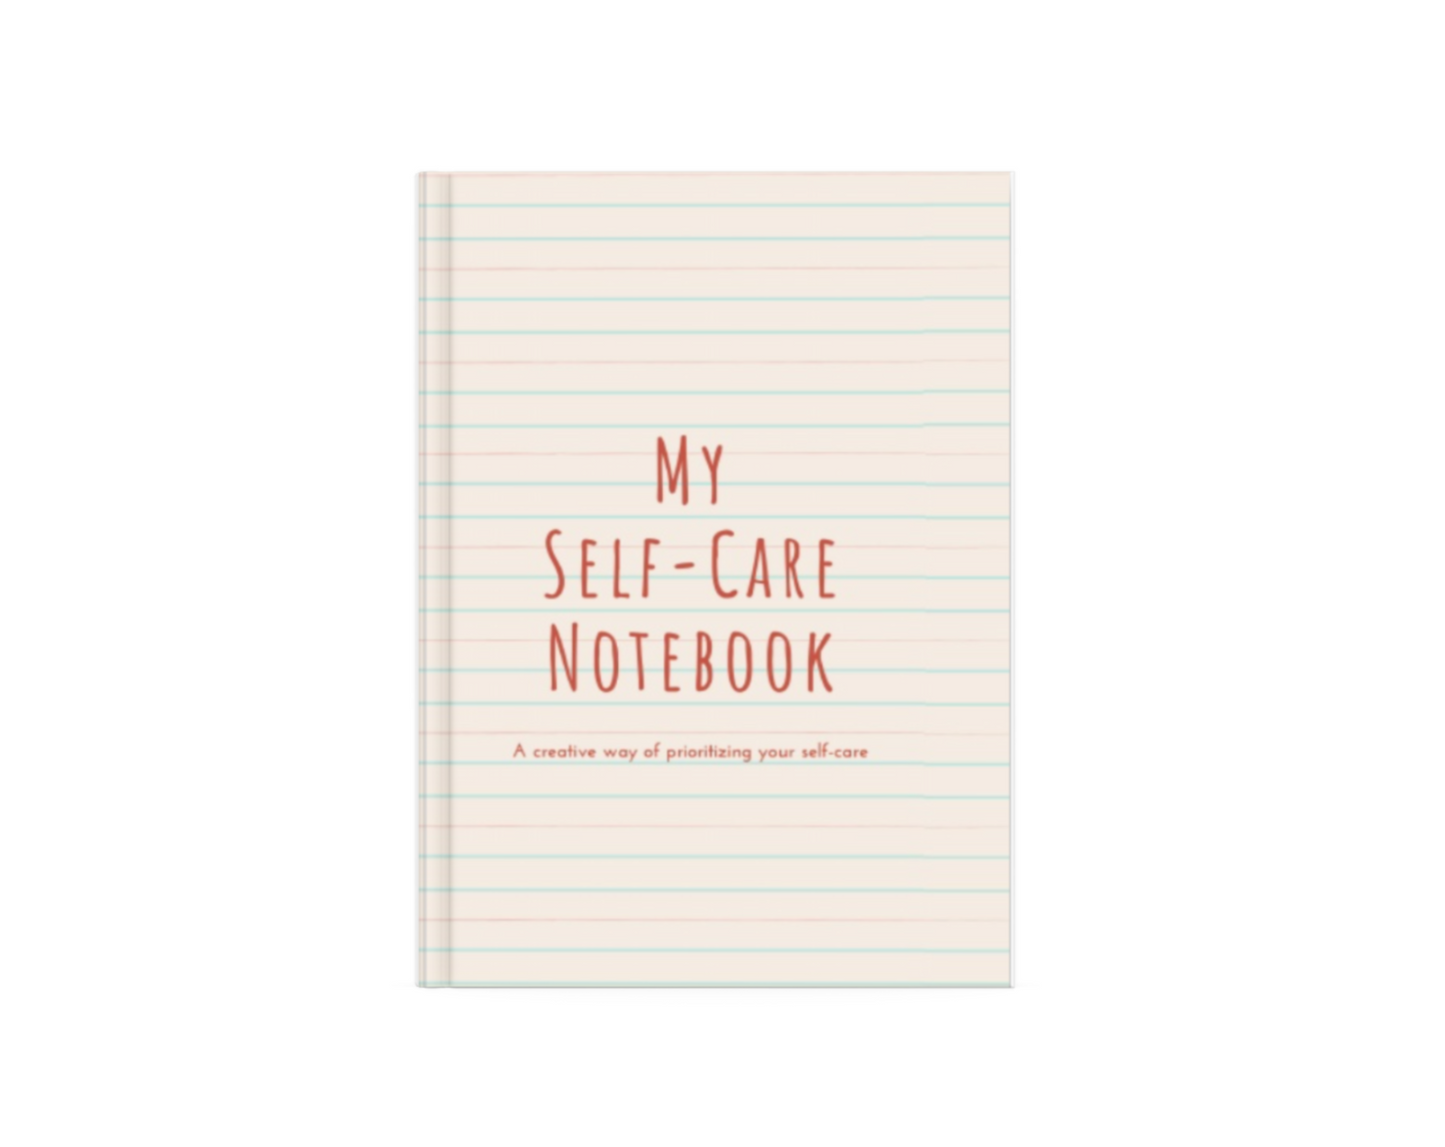 Self-care Notebook. 5 minute mindfulness journal